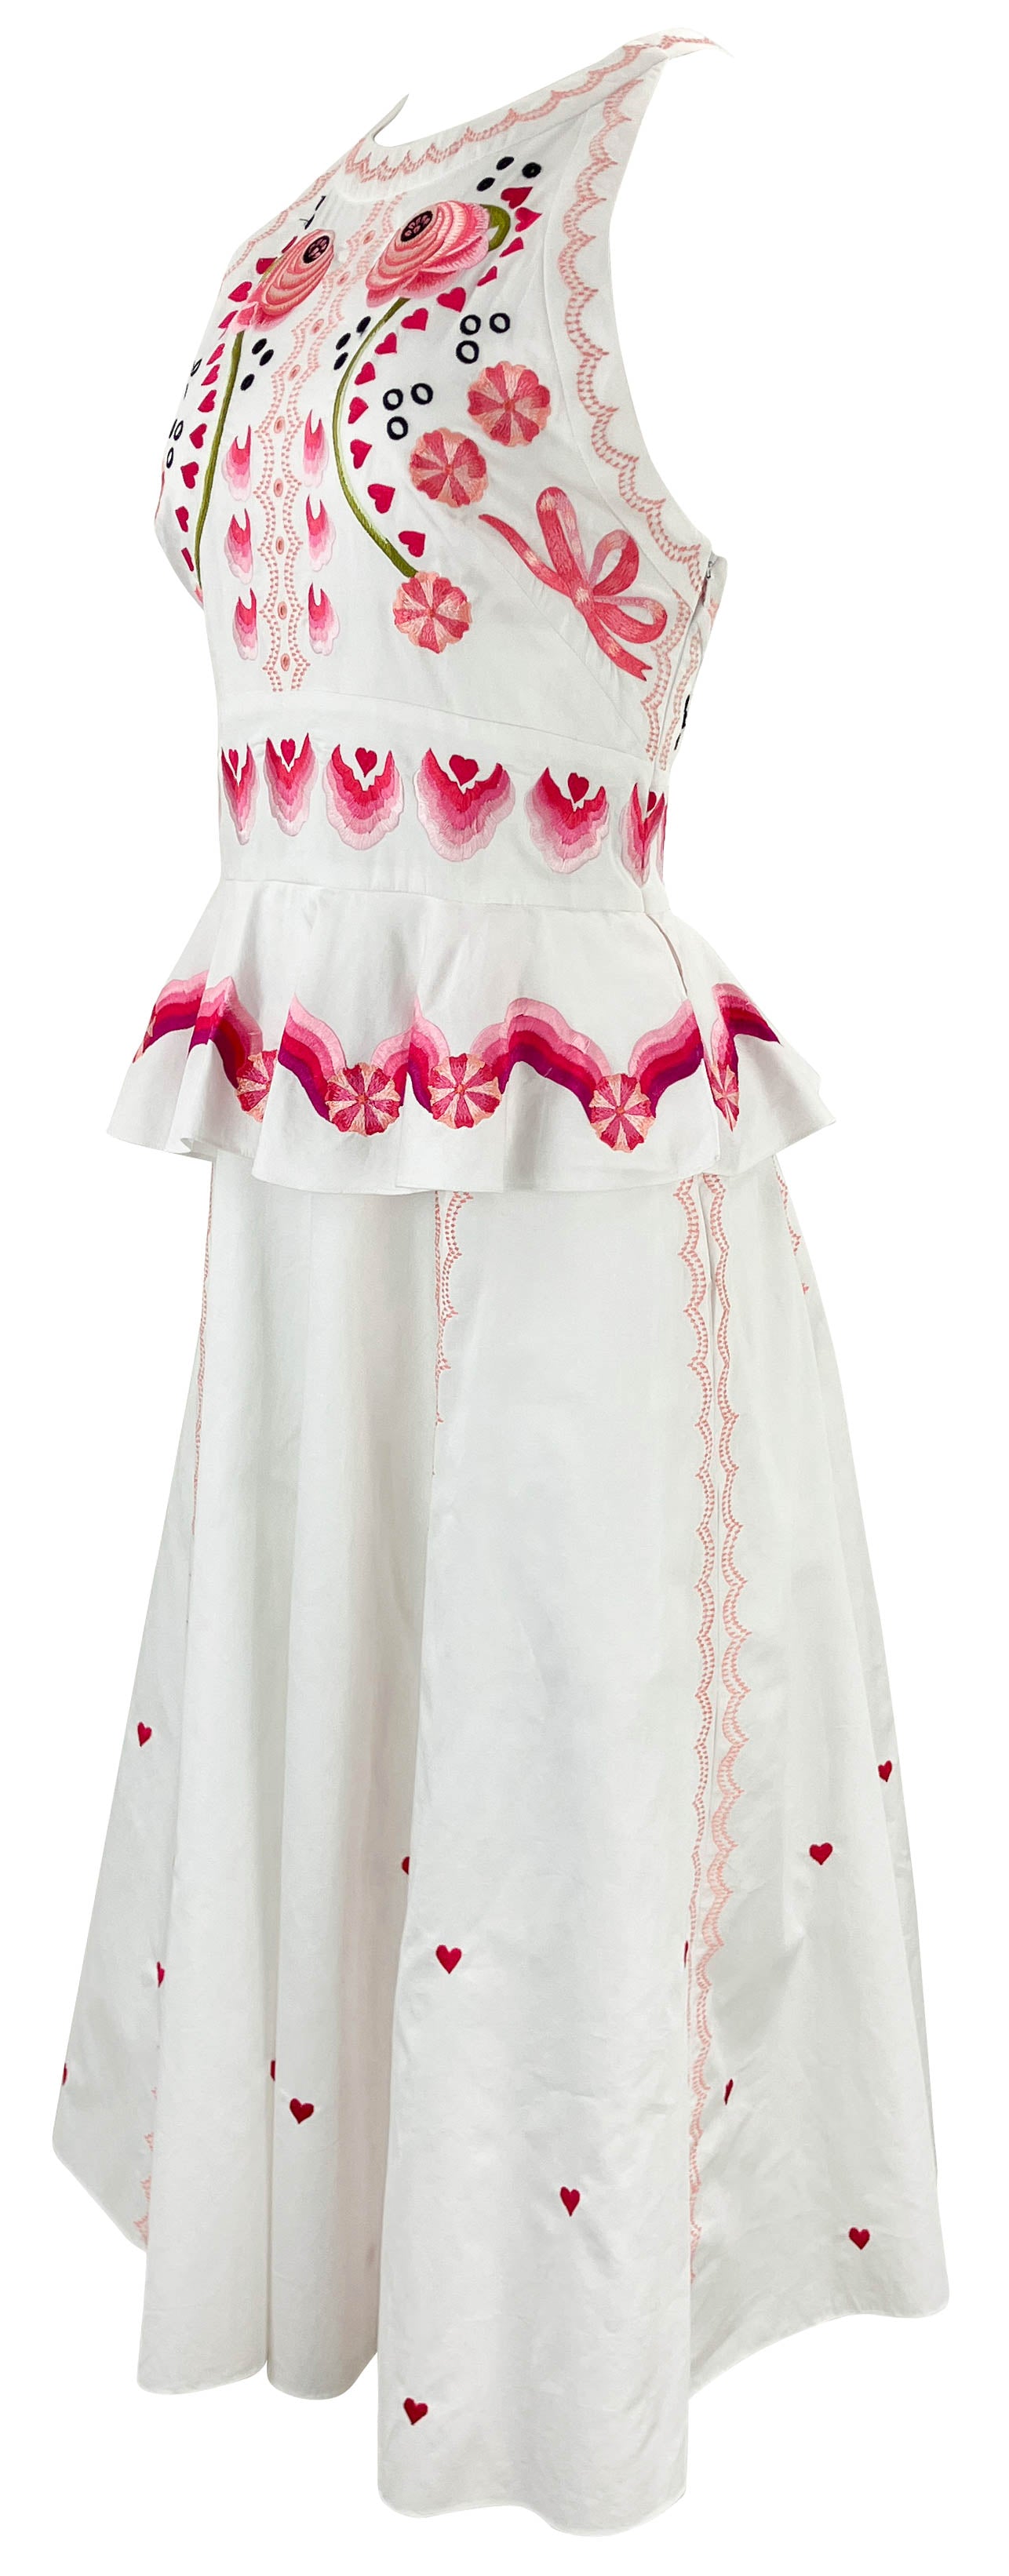 Temperley Valerie Dress in White - Discounts on Temperley at UAL